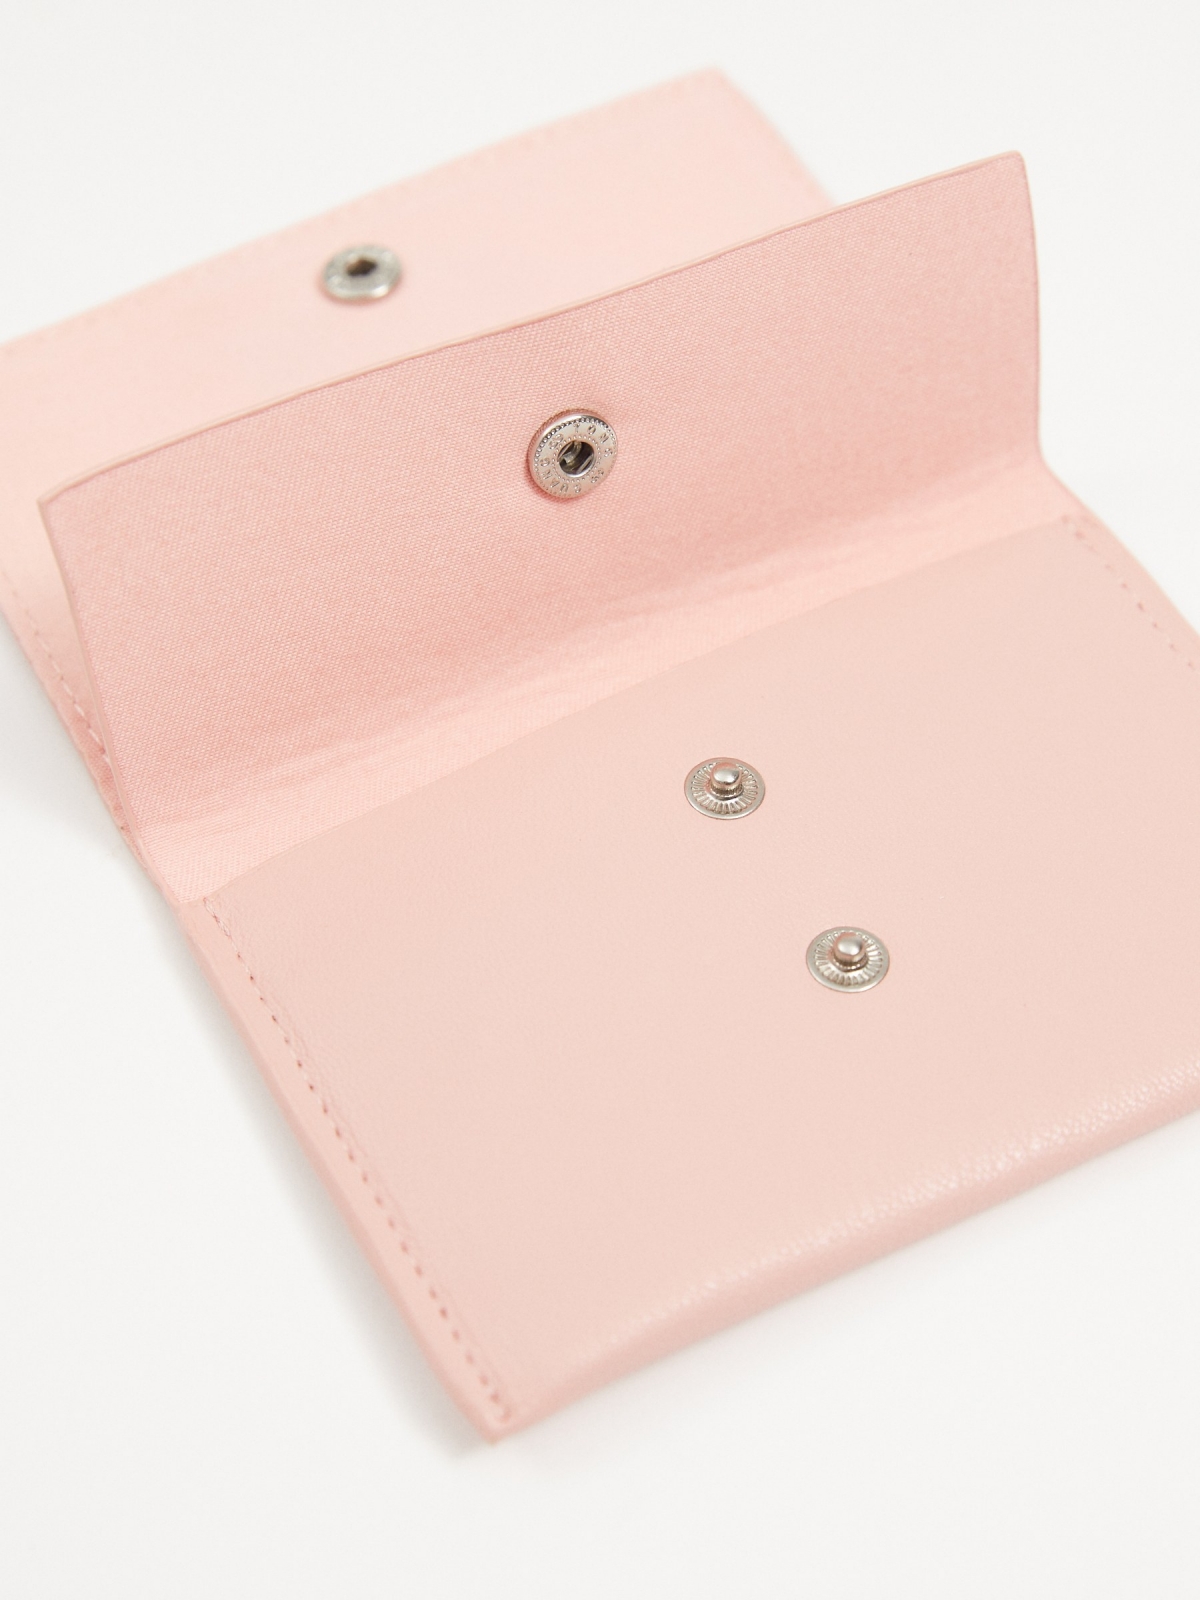 Pink leather effect wallet light pink interior view